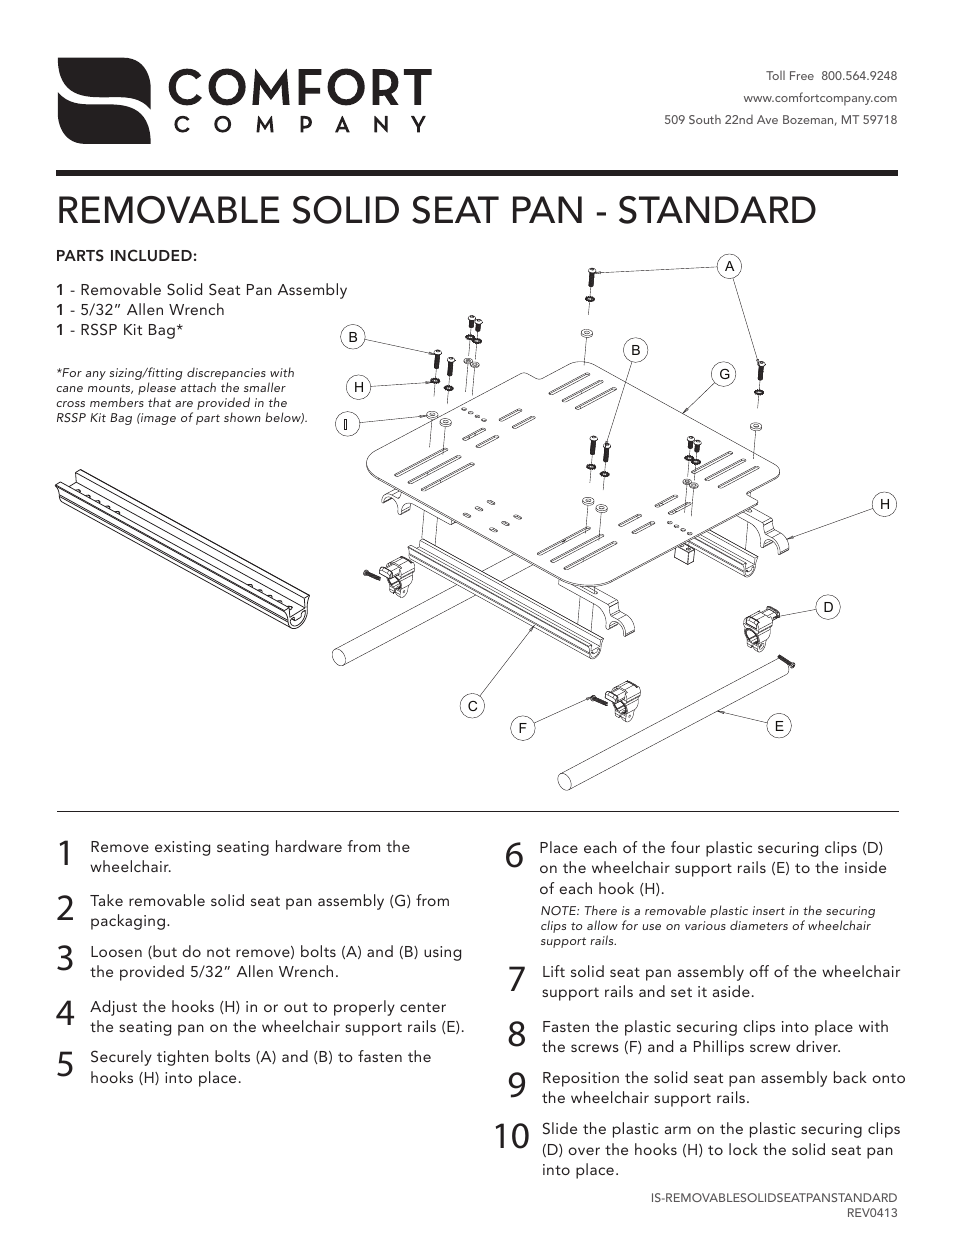 Removable Solid Seat Pan Standard